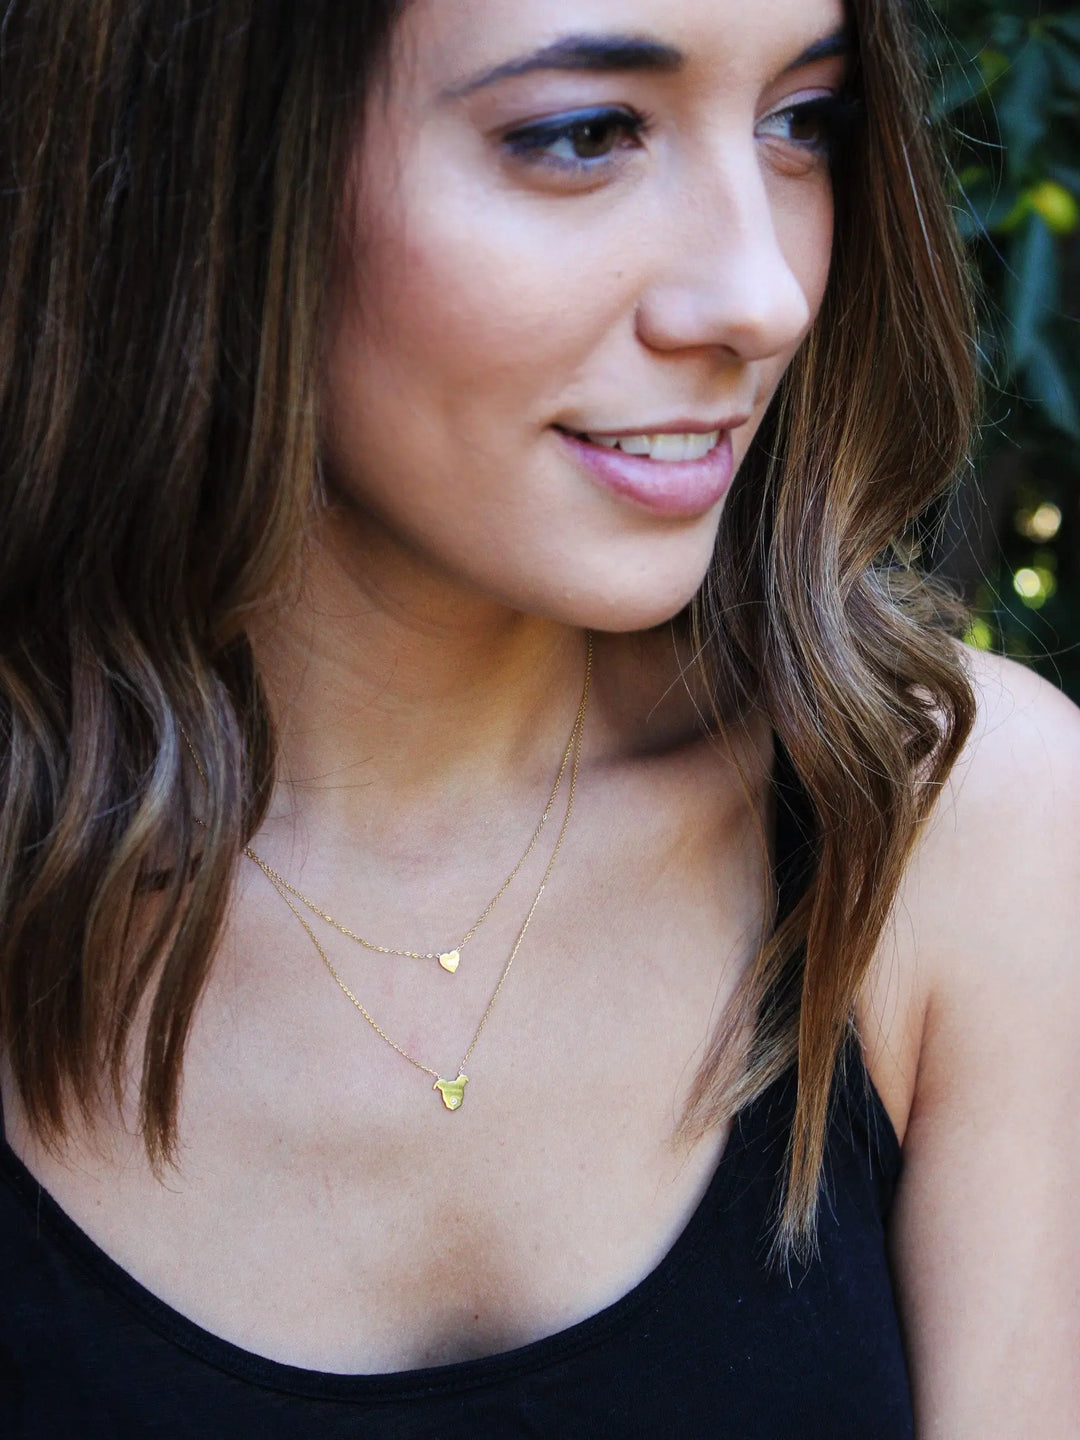 The Gentle Pit fine jewelry is perfect for layering. We adore the 14k Gold Heart Pendant paired with our signature 14k Gold Pittie Love Pendant